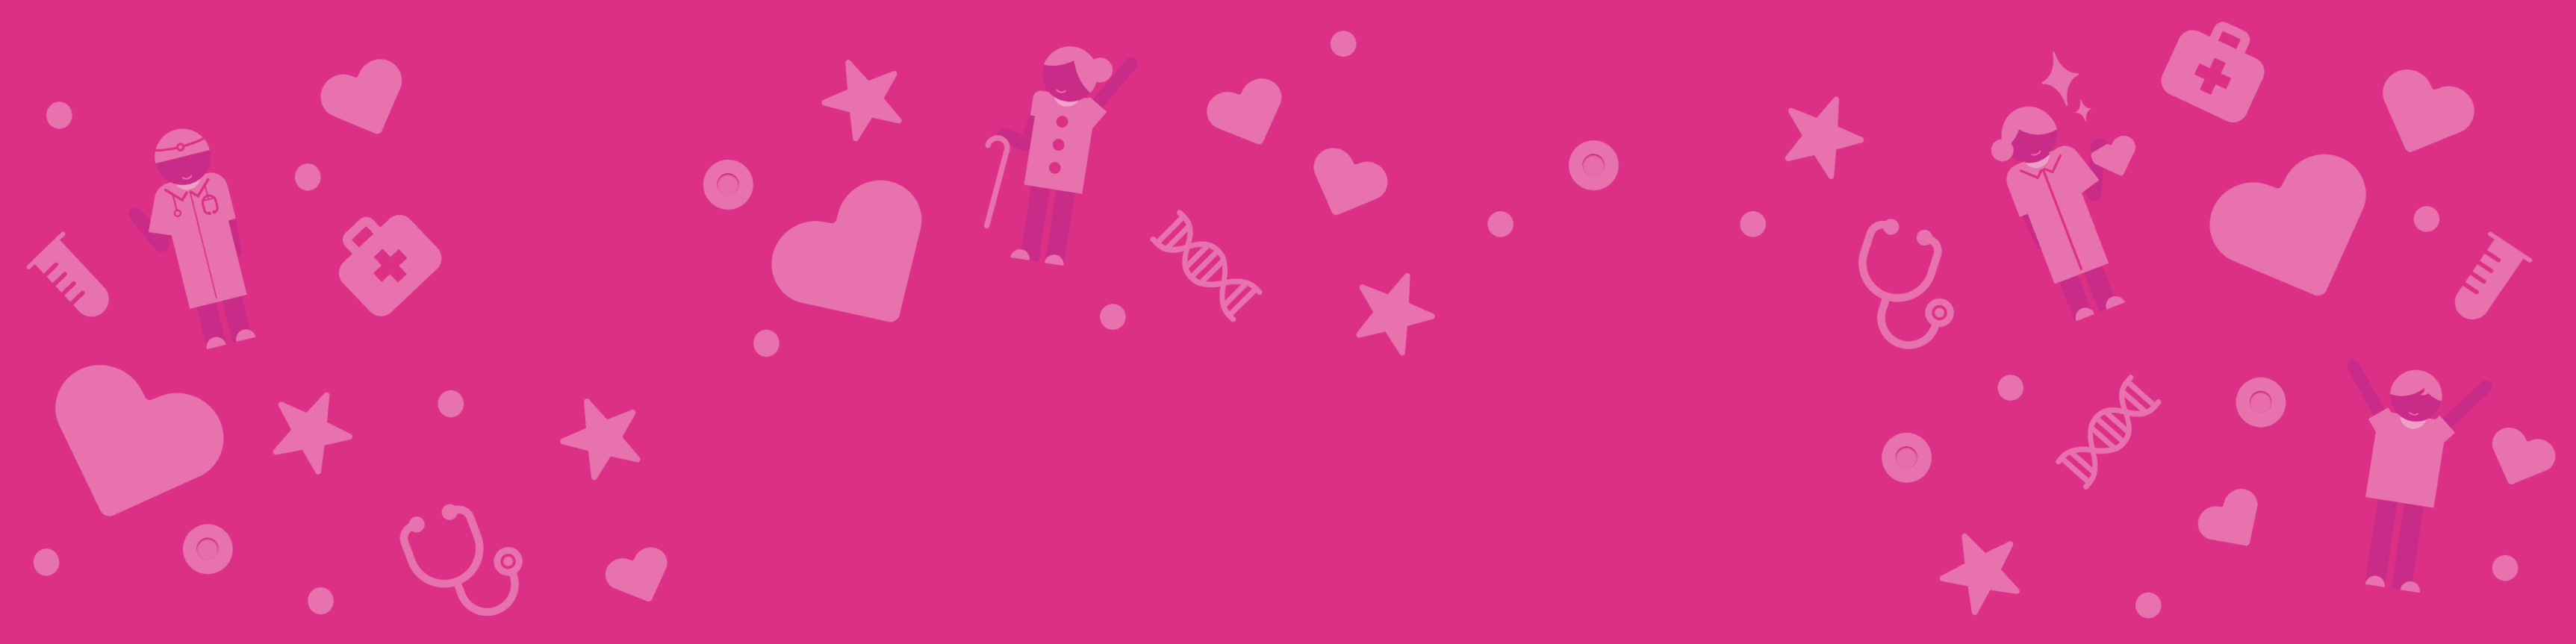 magenta banner with icons